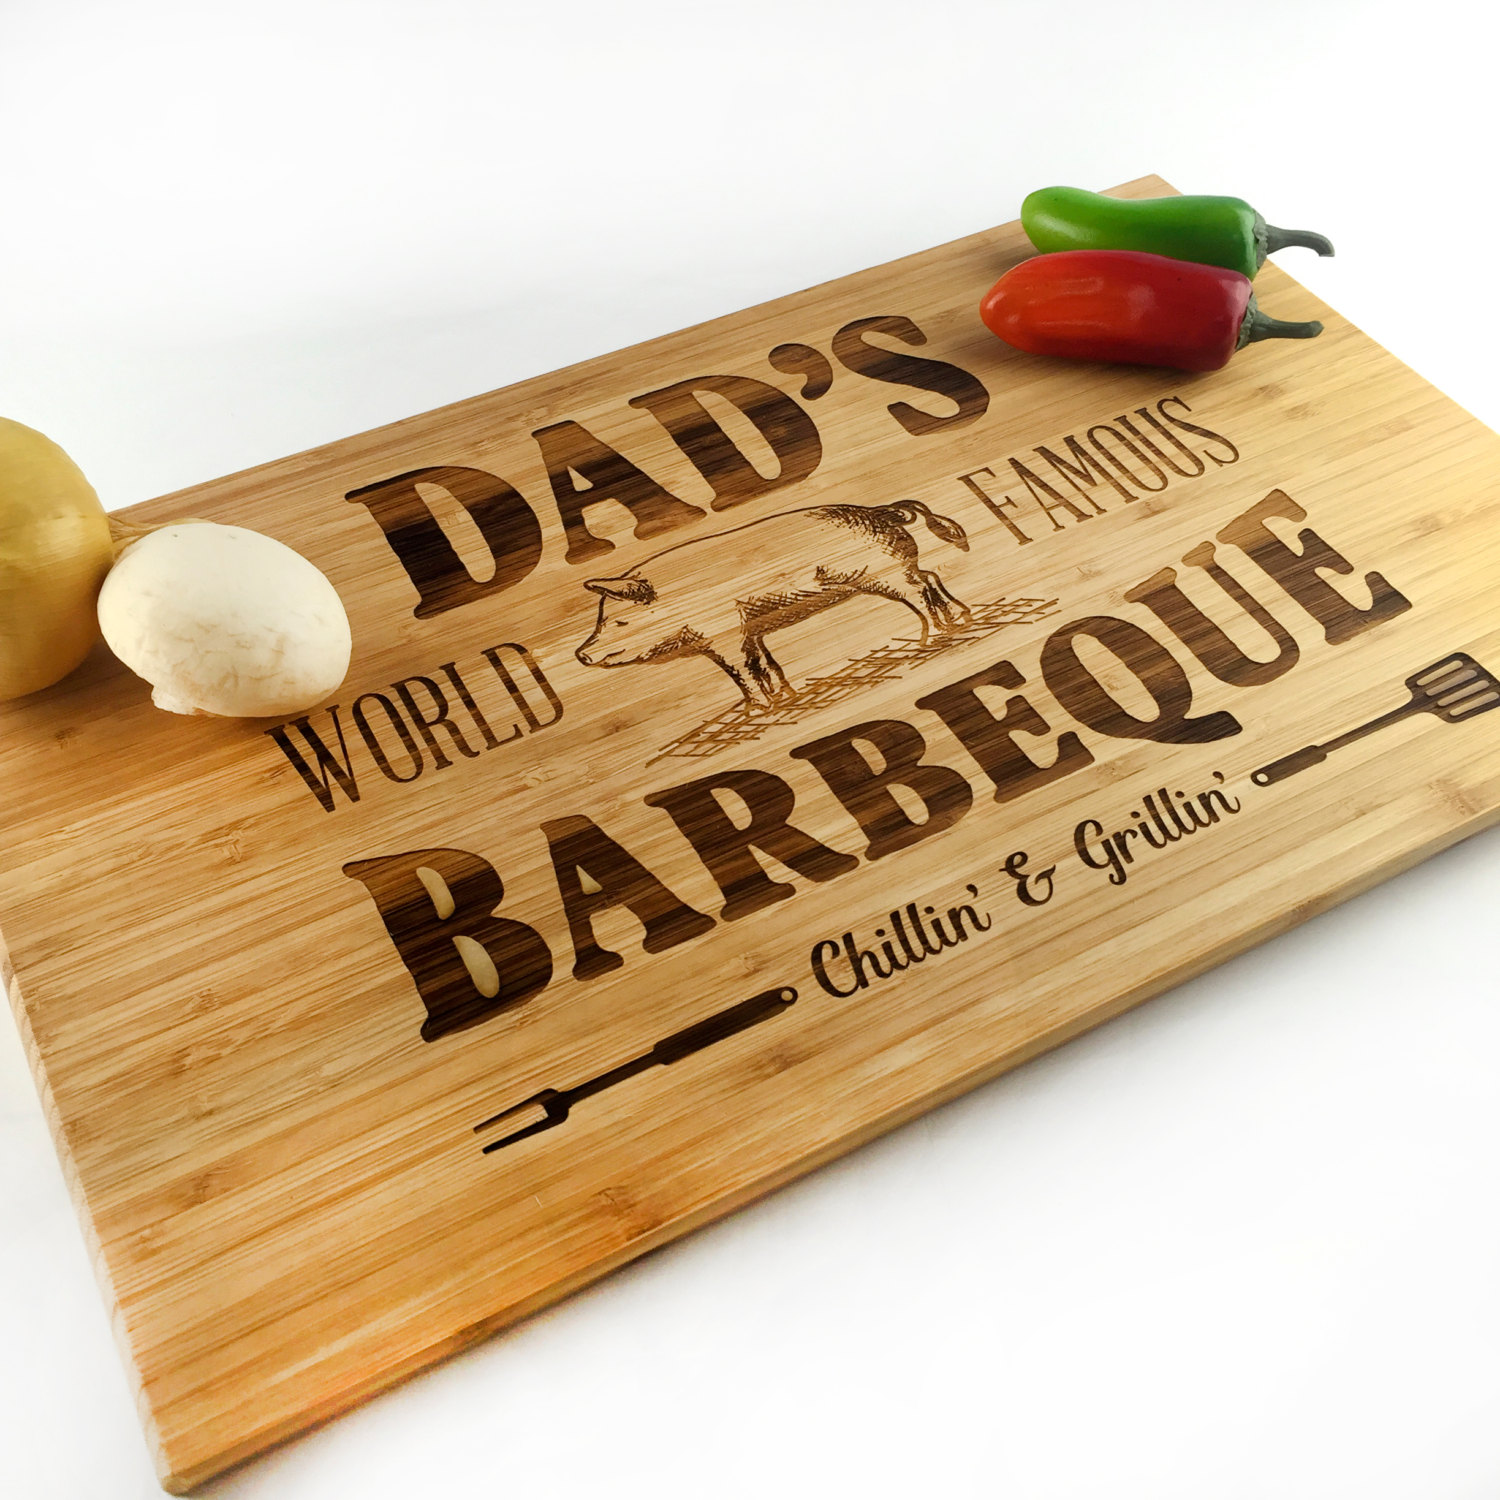 Easy Wood Projects For Father S Day